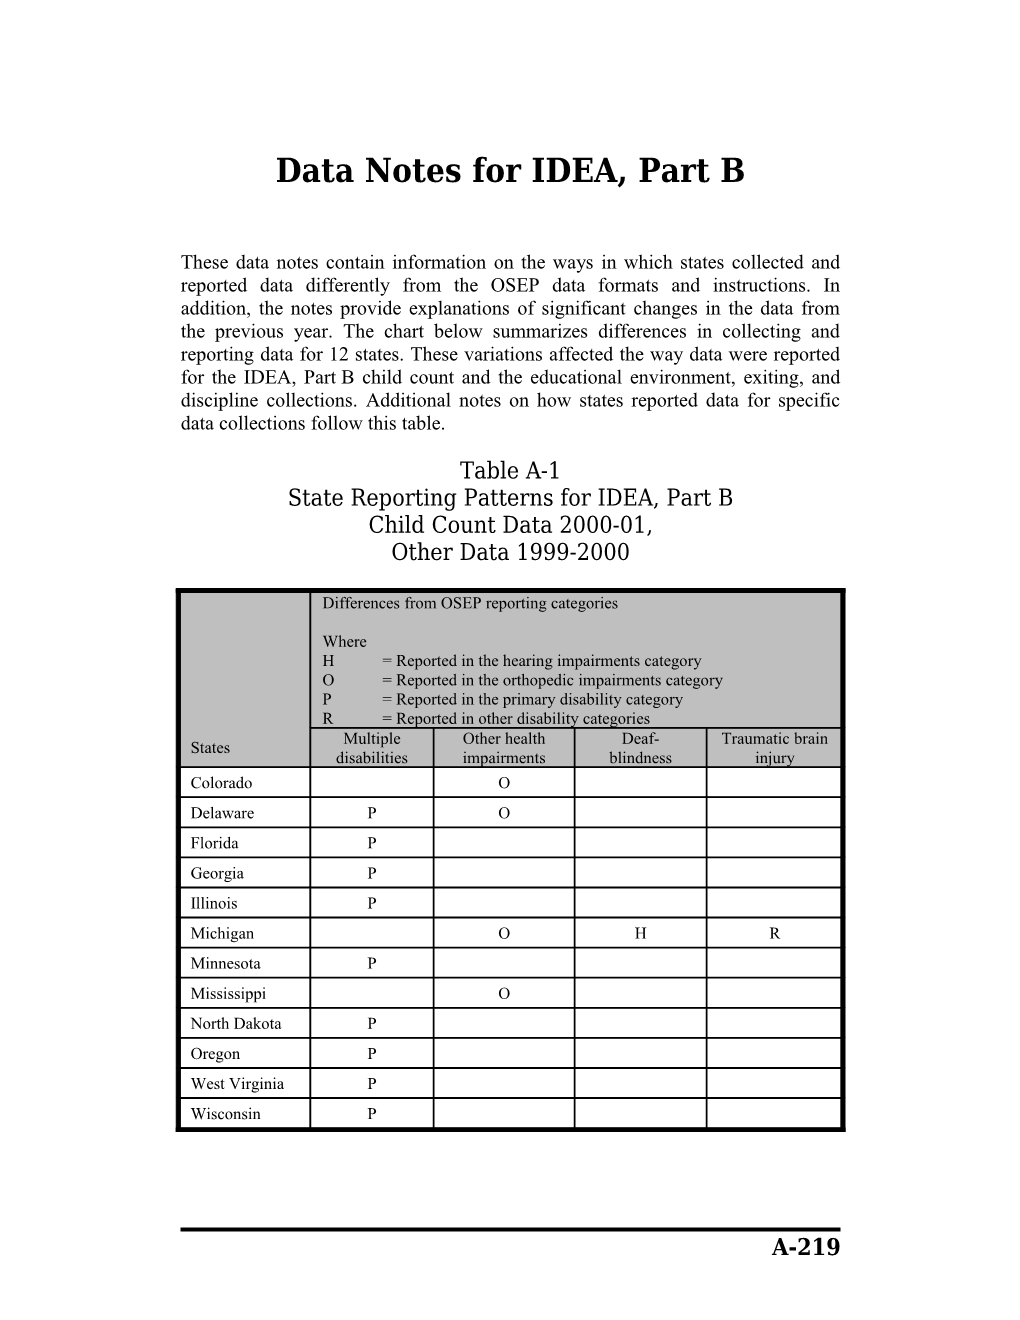 Data Notes for IDEA, Part B